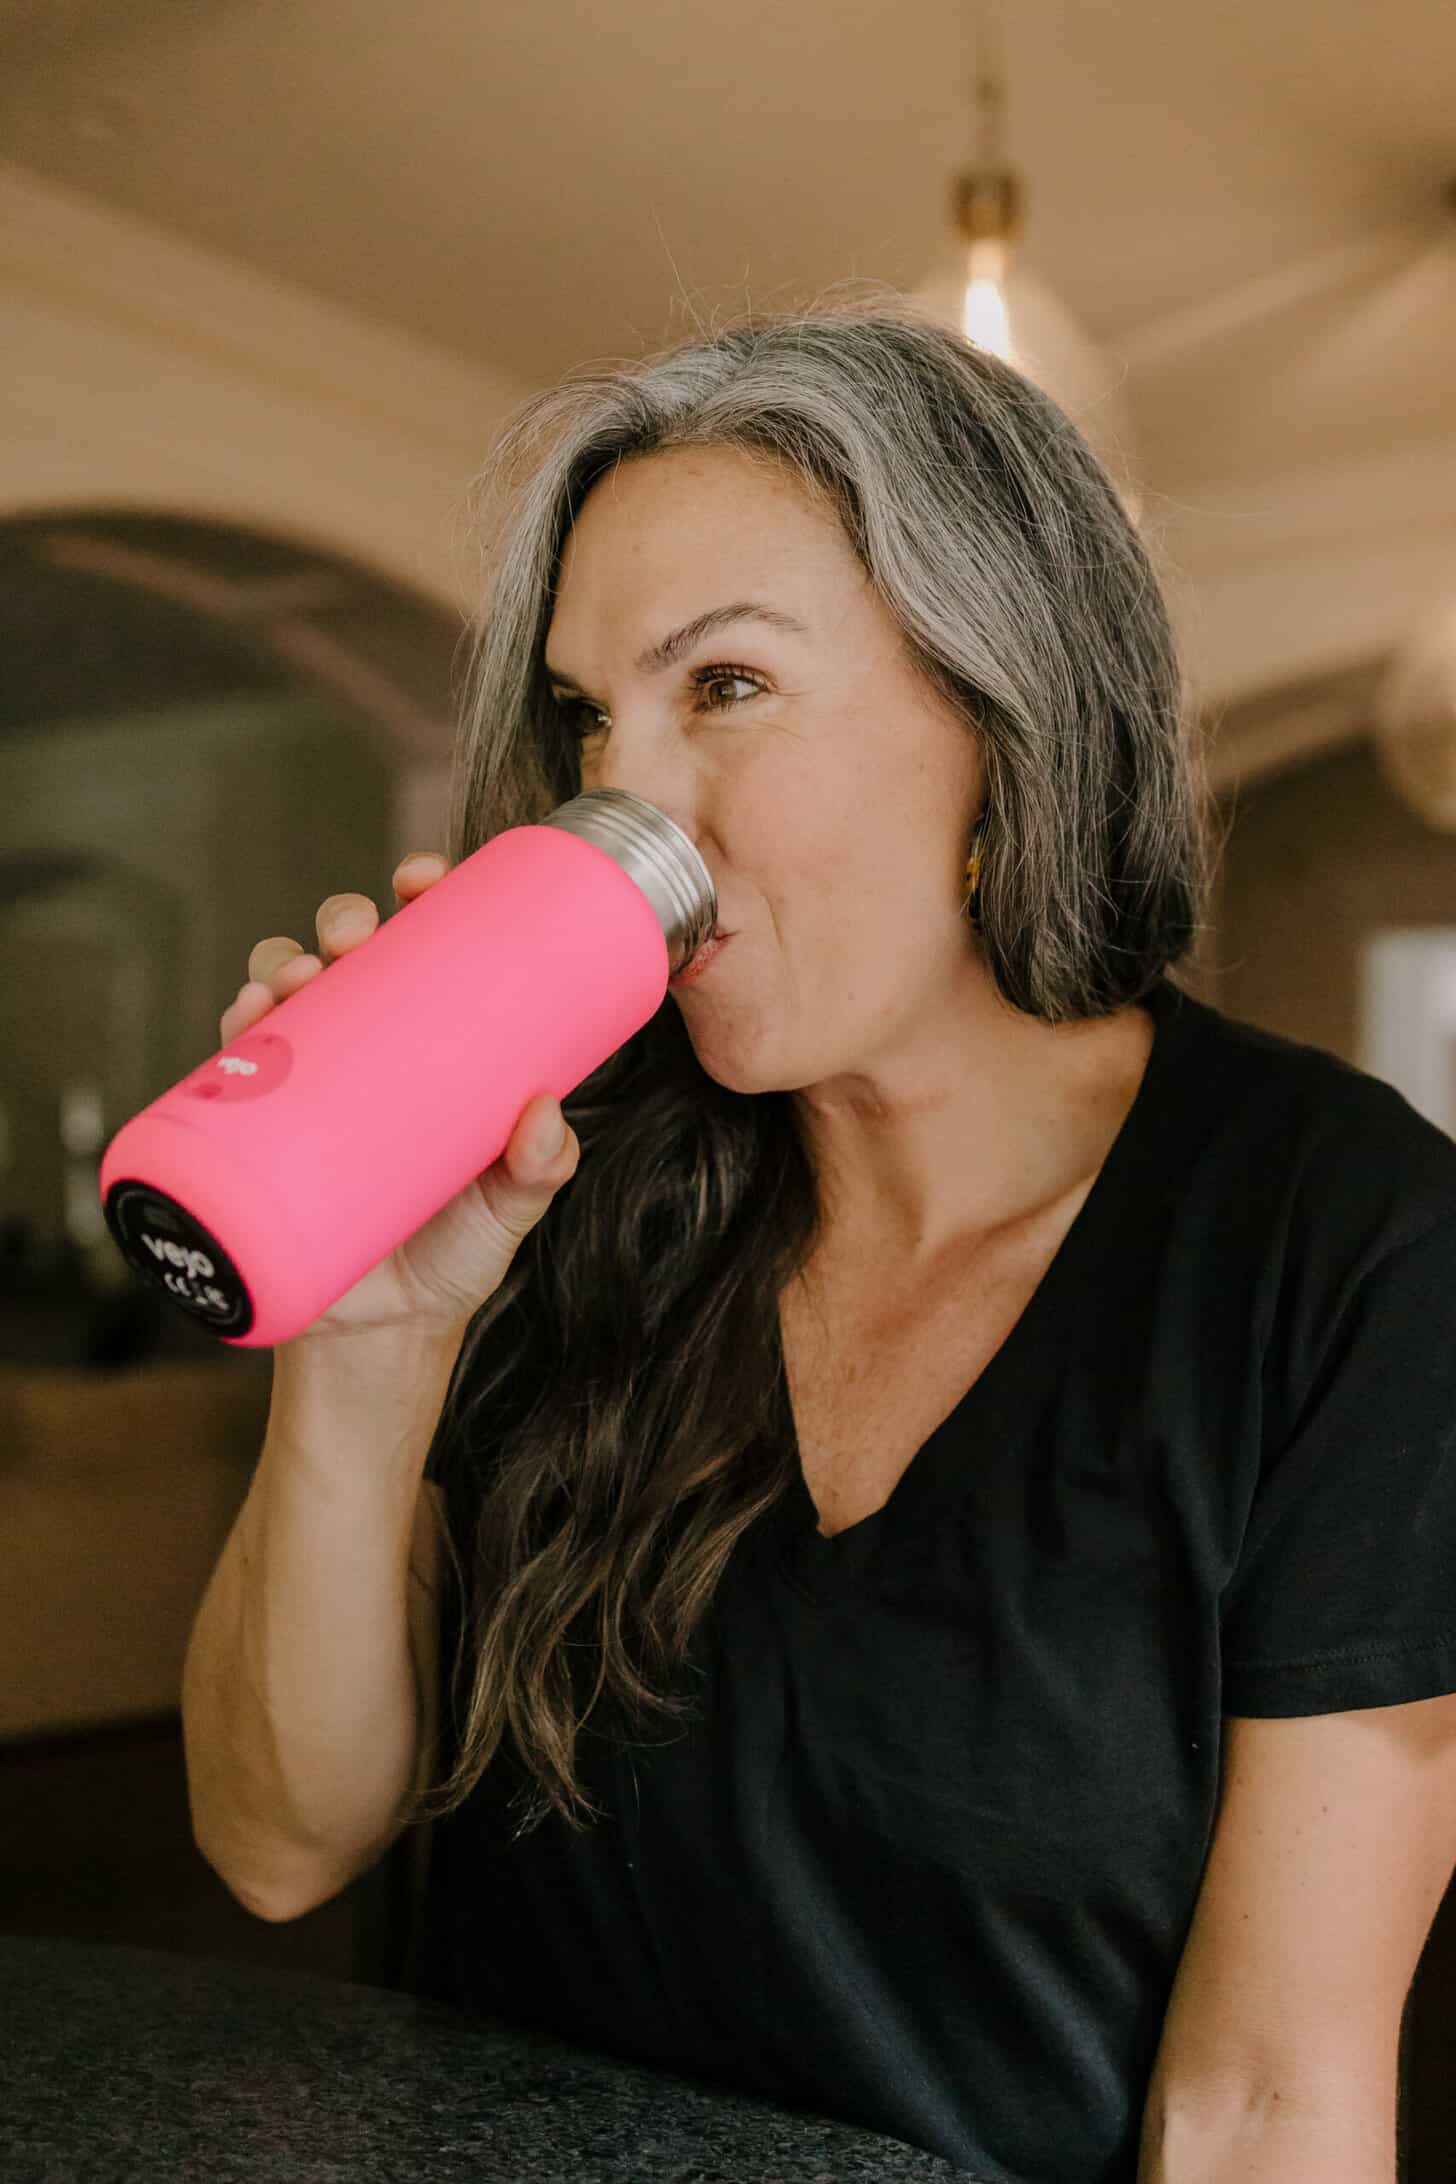 a woman with long wavy gray hair drinks from a hot pink portable blender